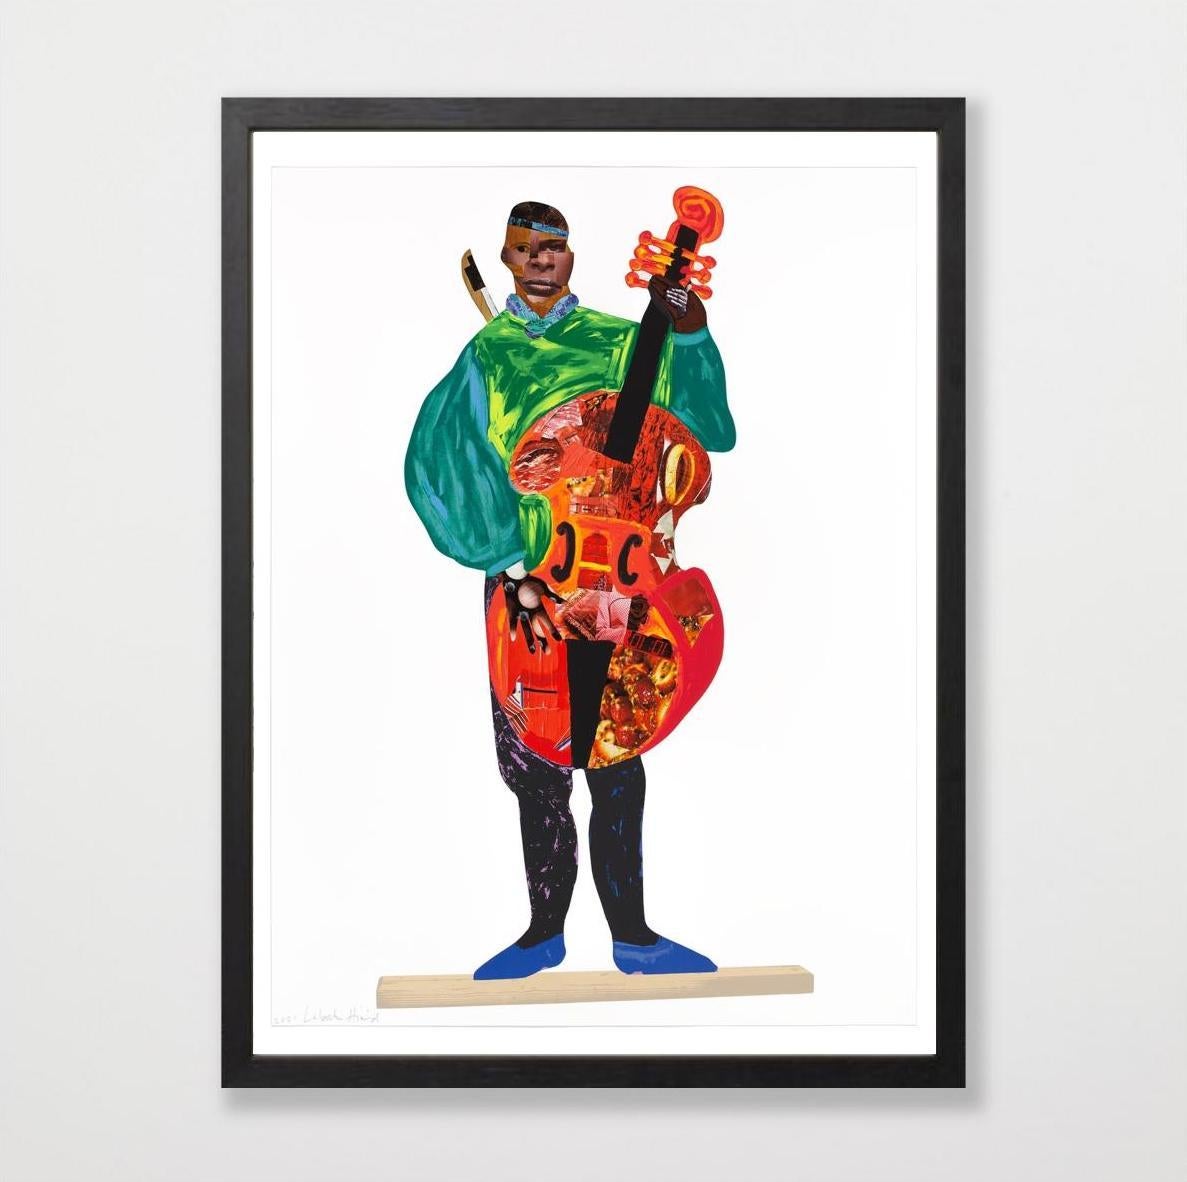 Naming the Money: Kwesi, 2004/2021 - Contemporary art, 21st Century, Colourful - Beige Figurative Print by Lubaina Himid